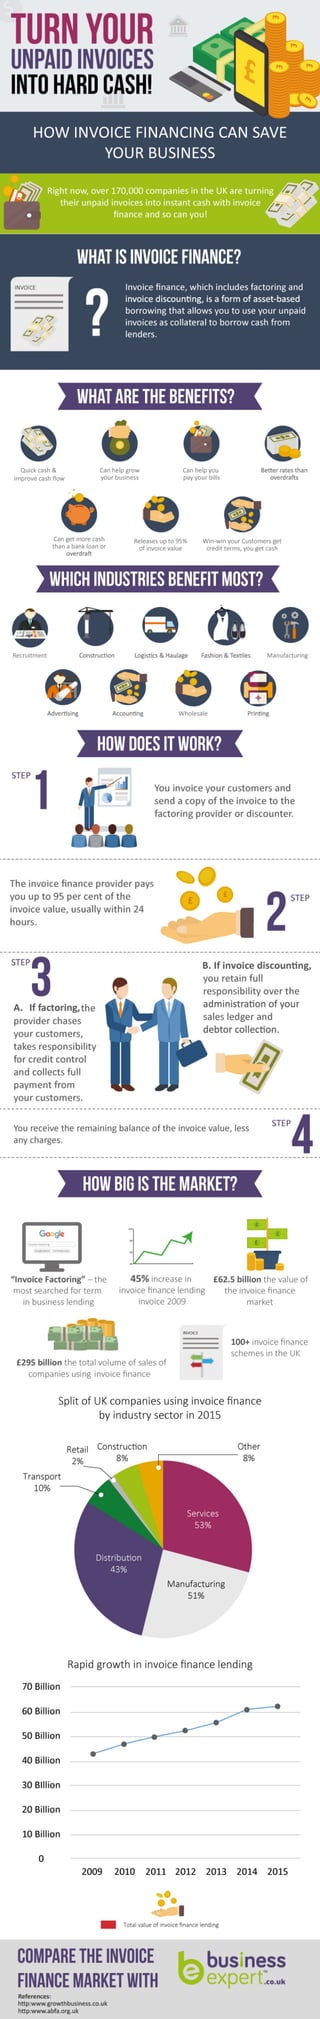 All About Invoice Financing